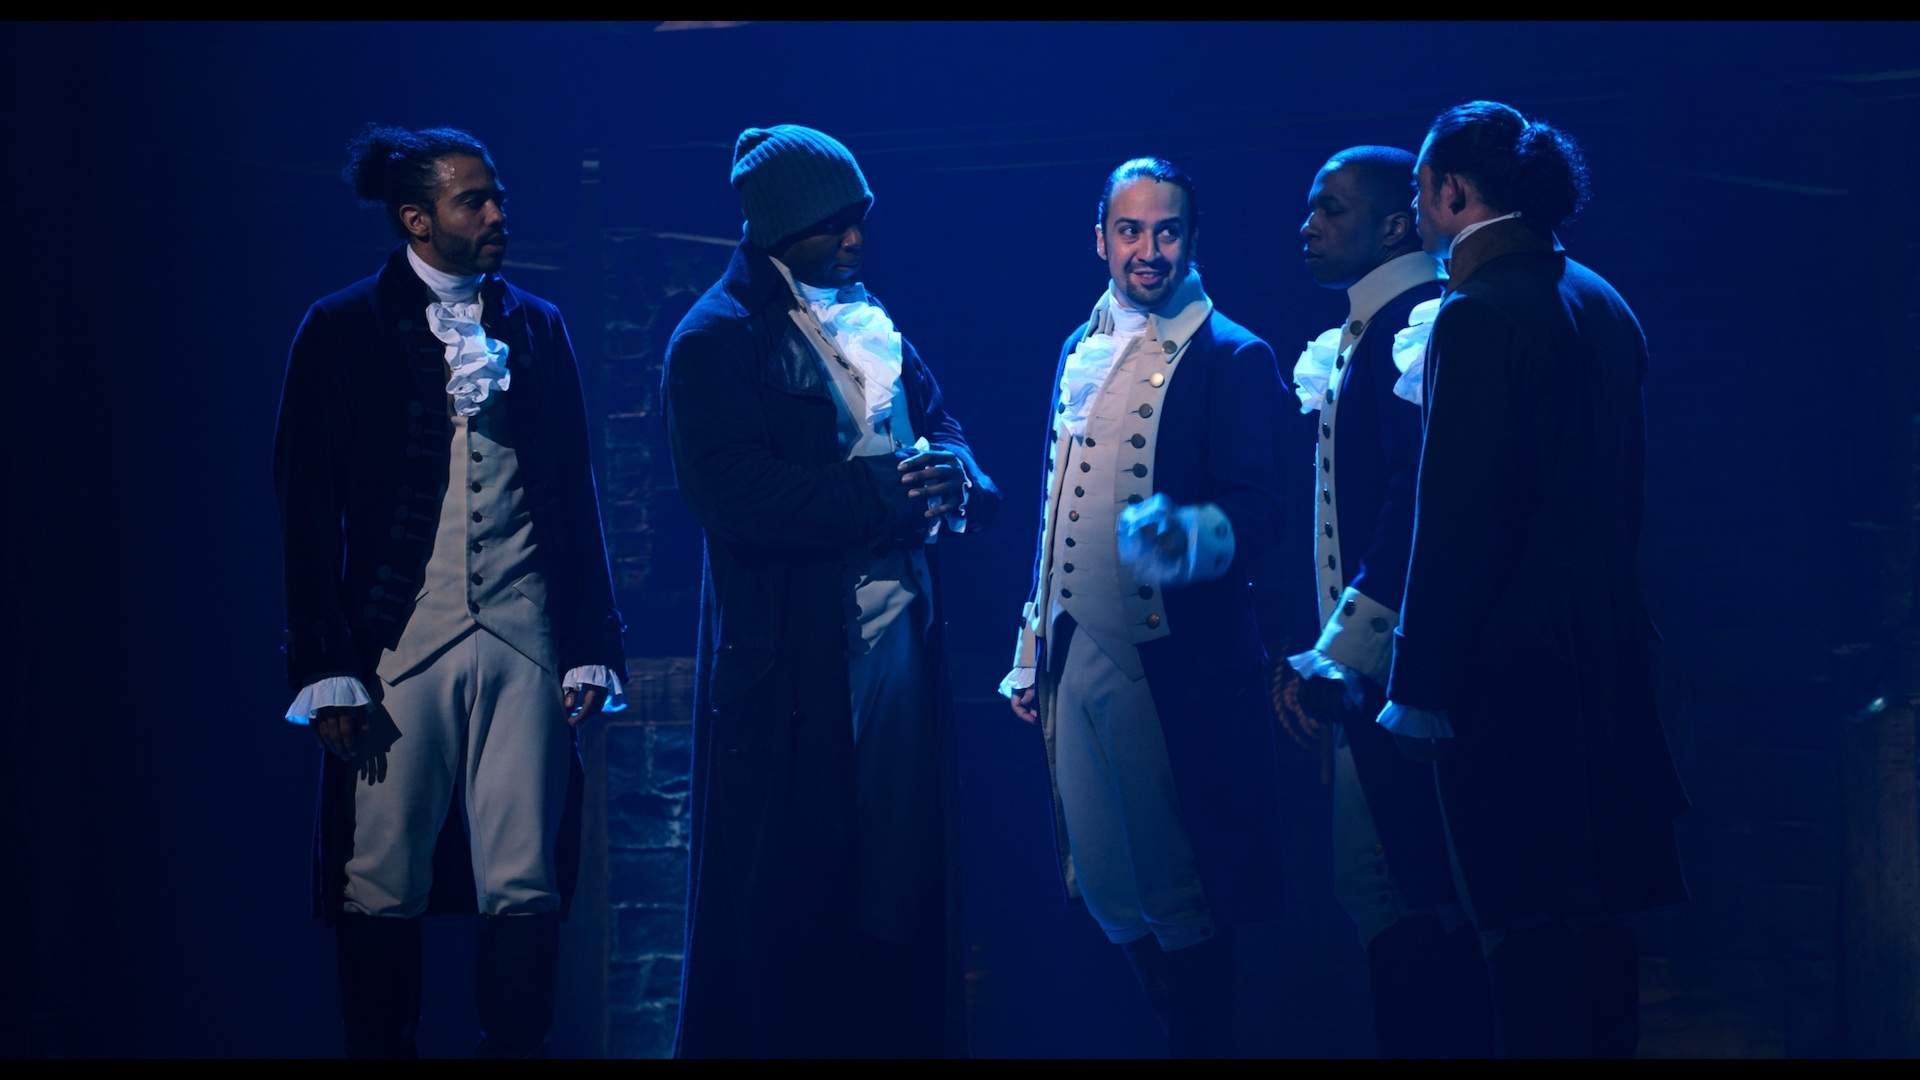 Lin-Manuel Miranda's 'Hamilton' with the Original Broadway Cast Is Being Fast-Tracked to Disney+